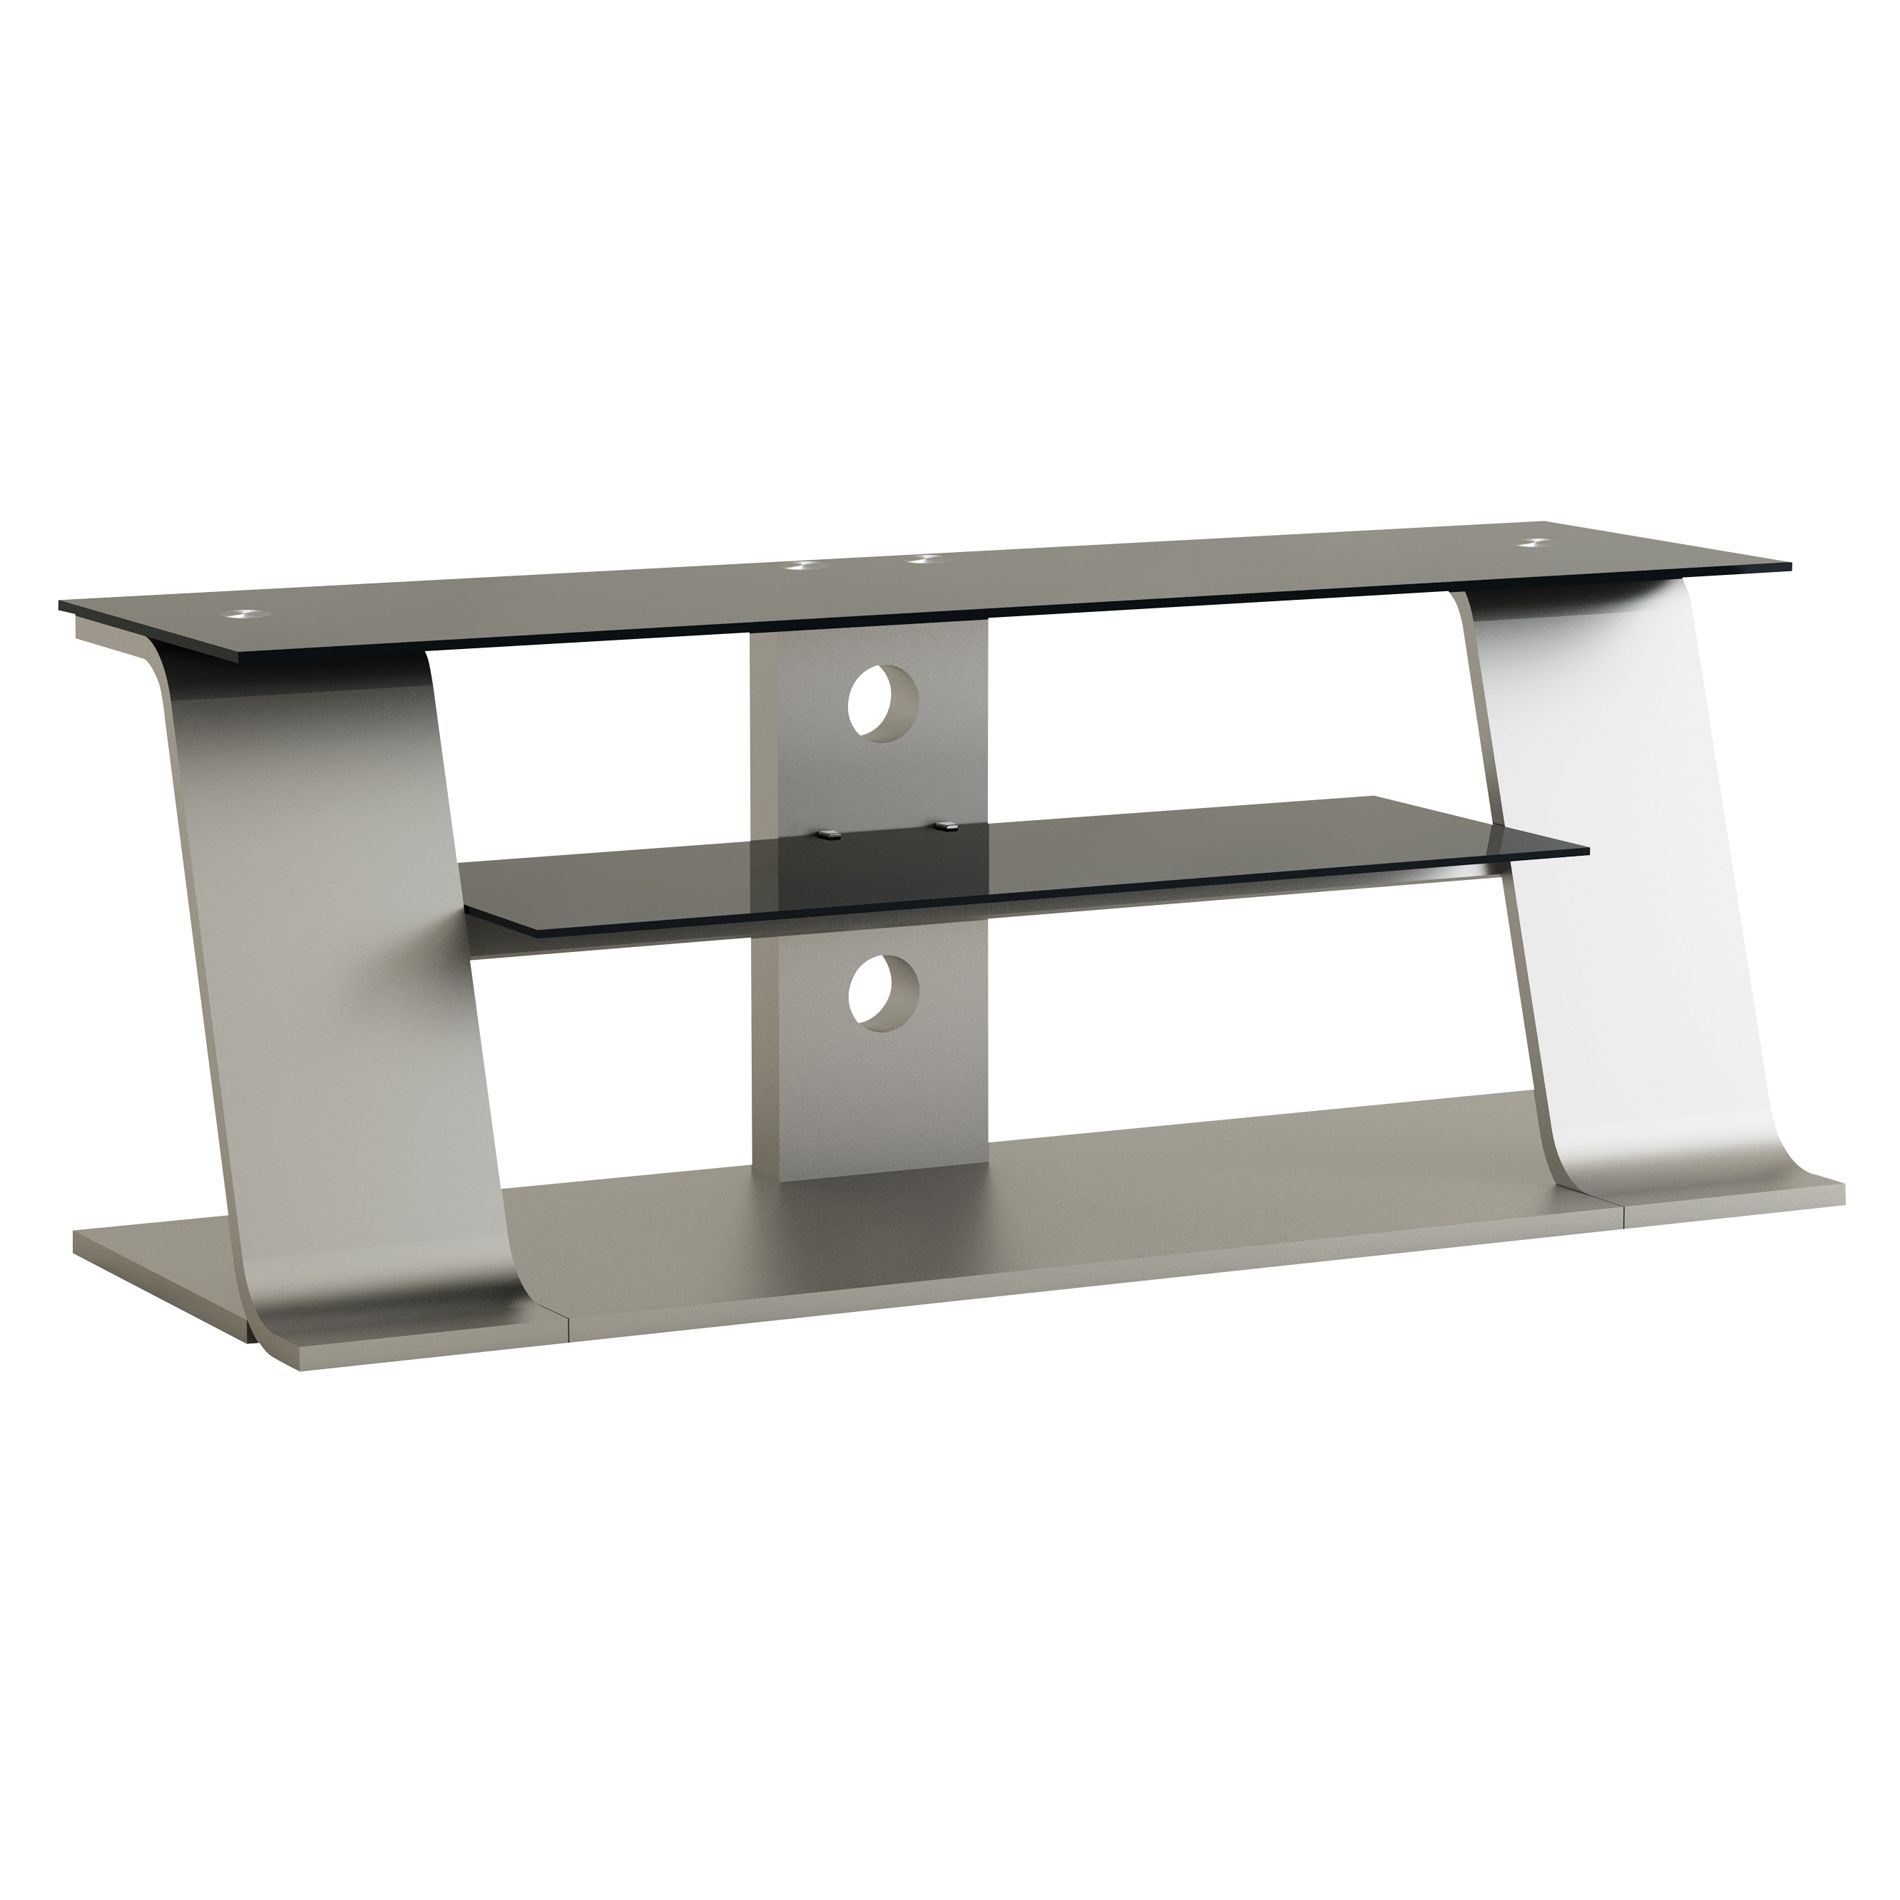 Alphaline - M401 - Silver Metal and Glass TV Stand | Sears Outlet